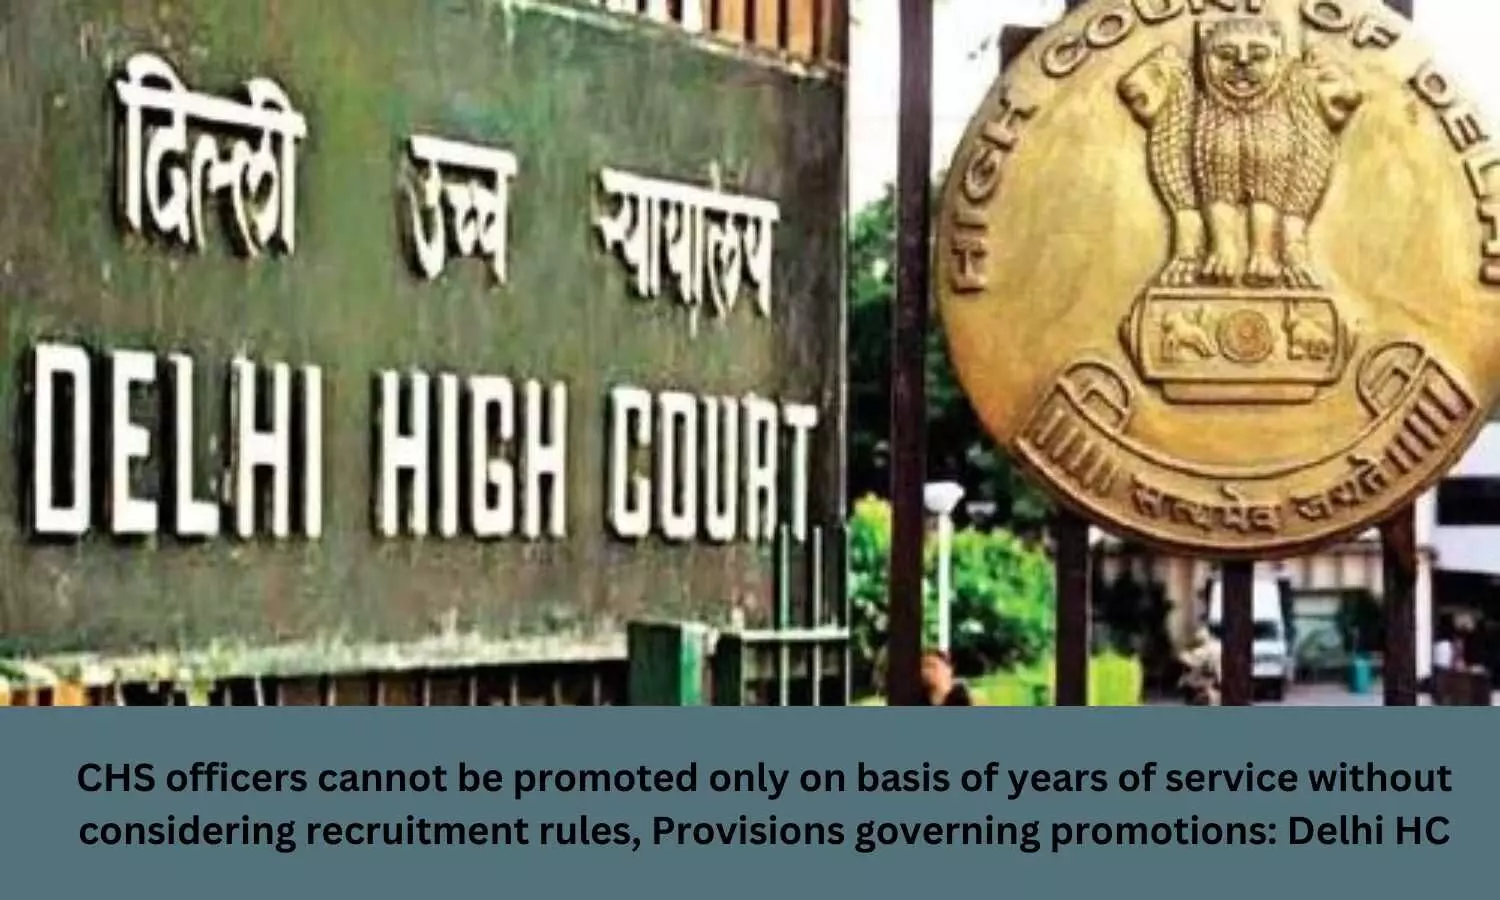 CHS officers cannot be promoted only on basis of years of service without considering recruitment rules, Provisions governing promotions: Delhi High Court